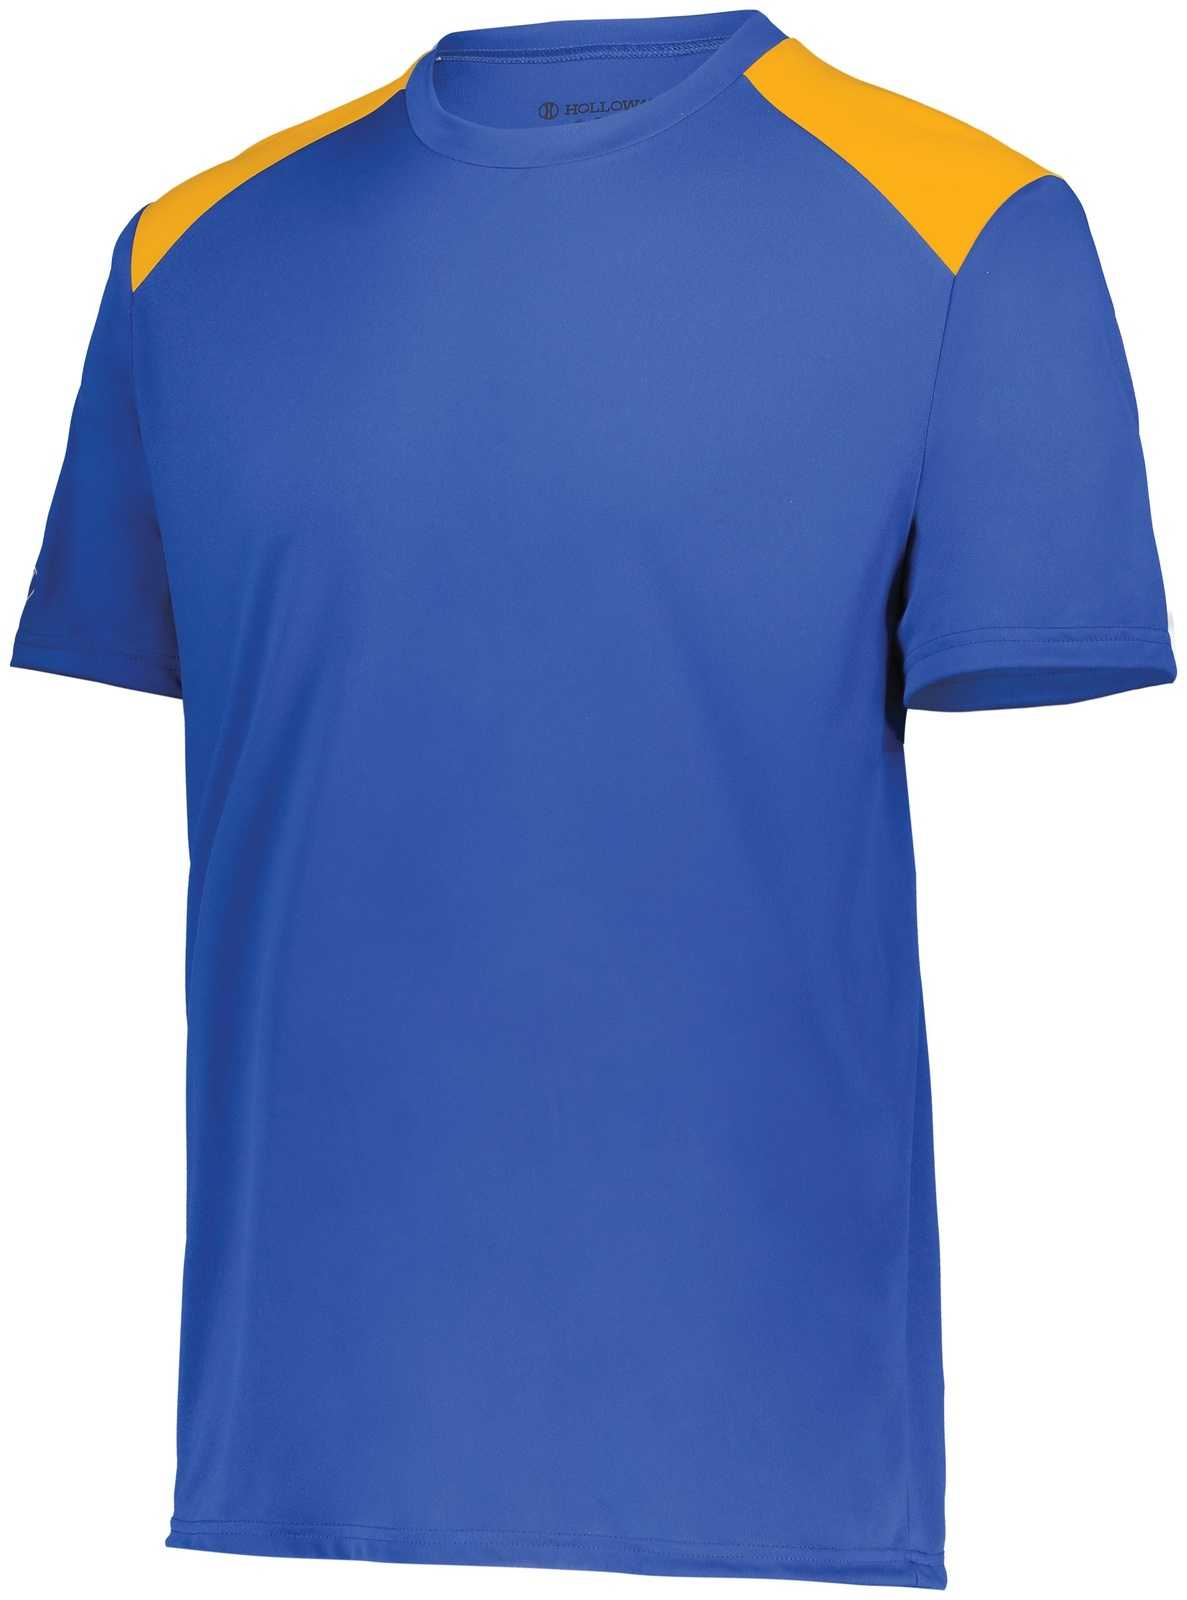 Holloway 223501 Momentum Team Tee - Royal Gold - HIT a Double